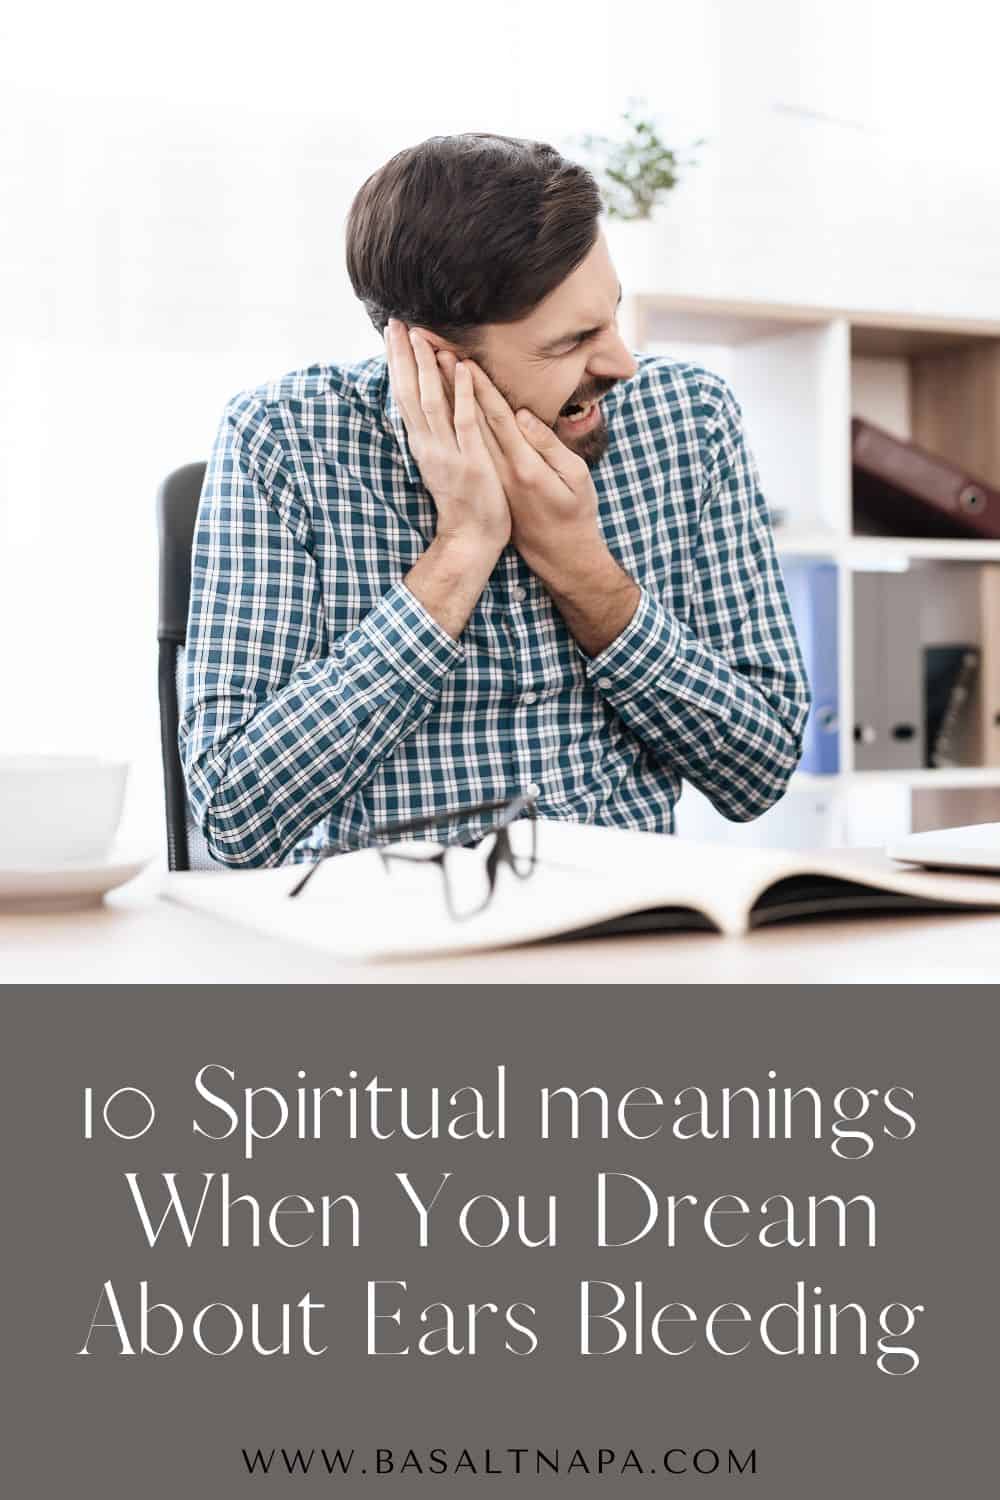 10 Spiritual meanings When You Dream About Ears Bleeding